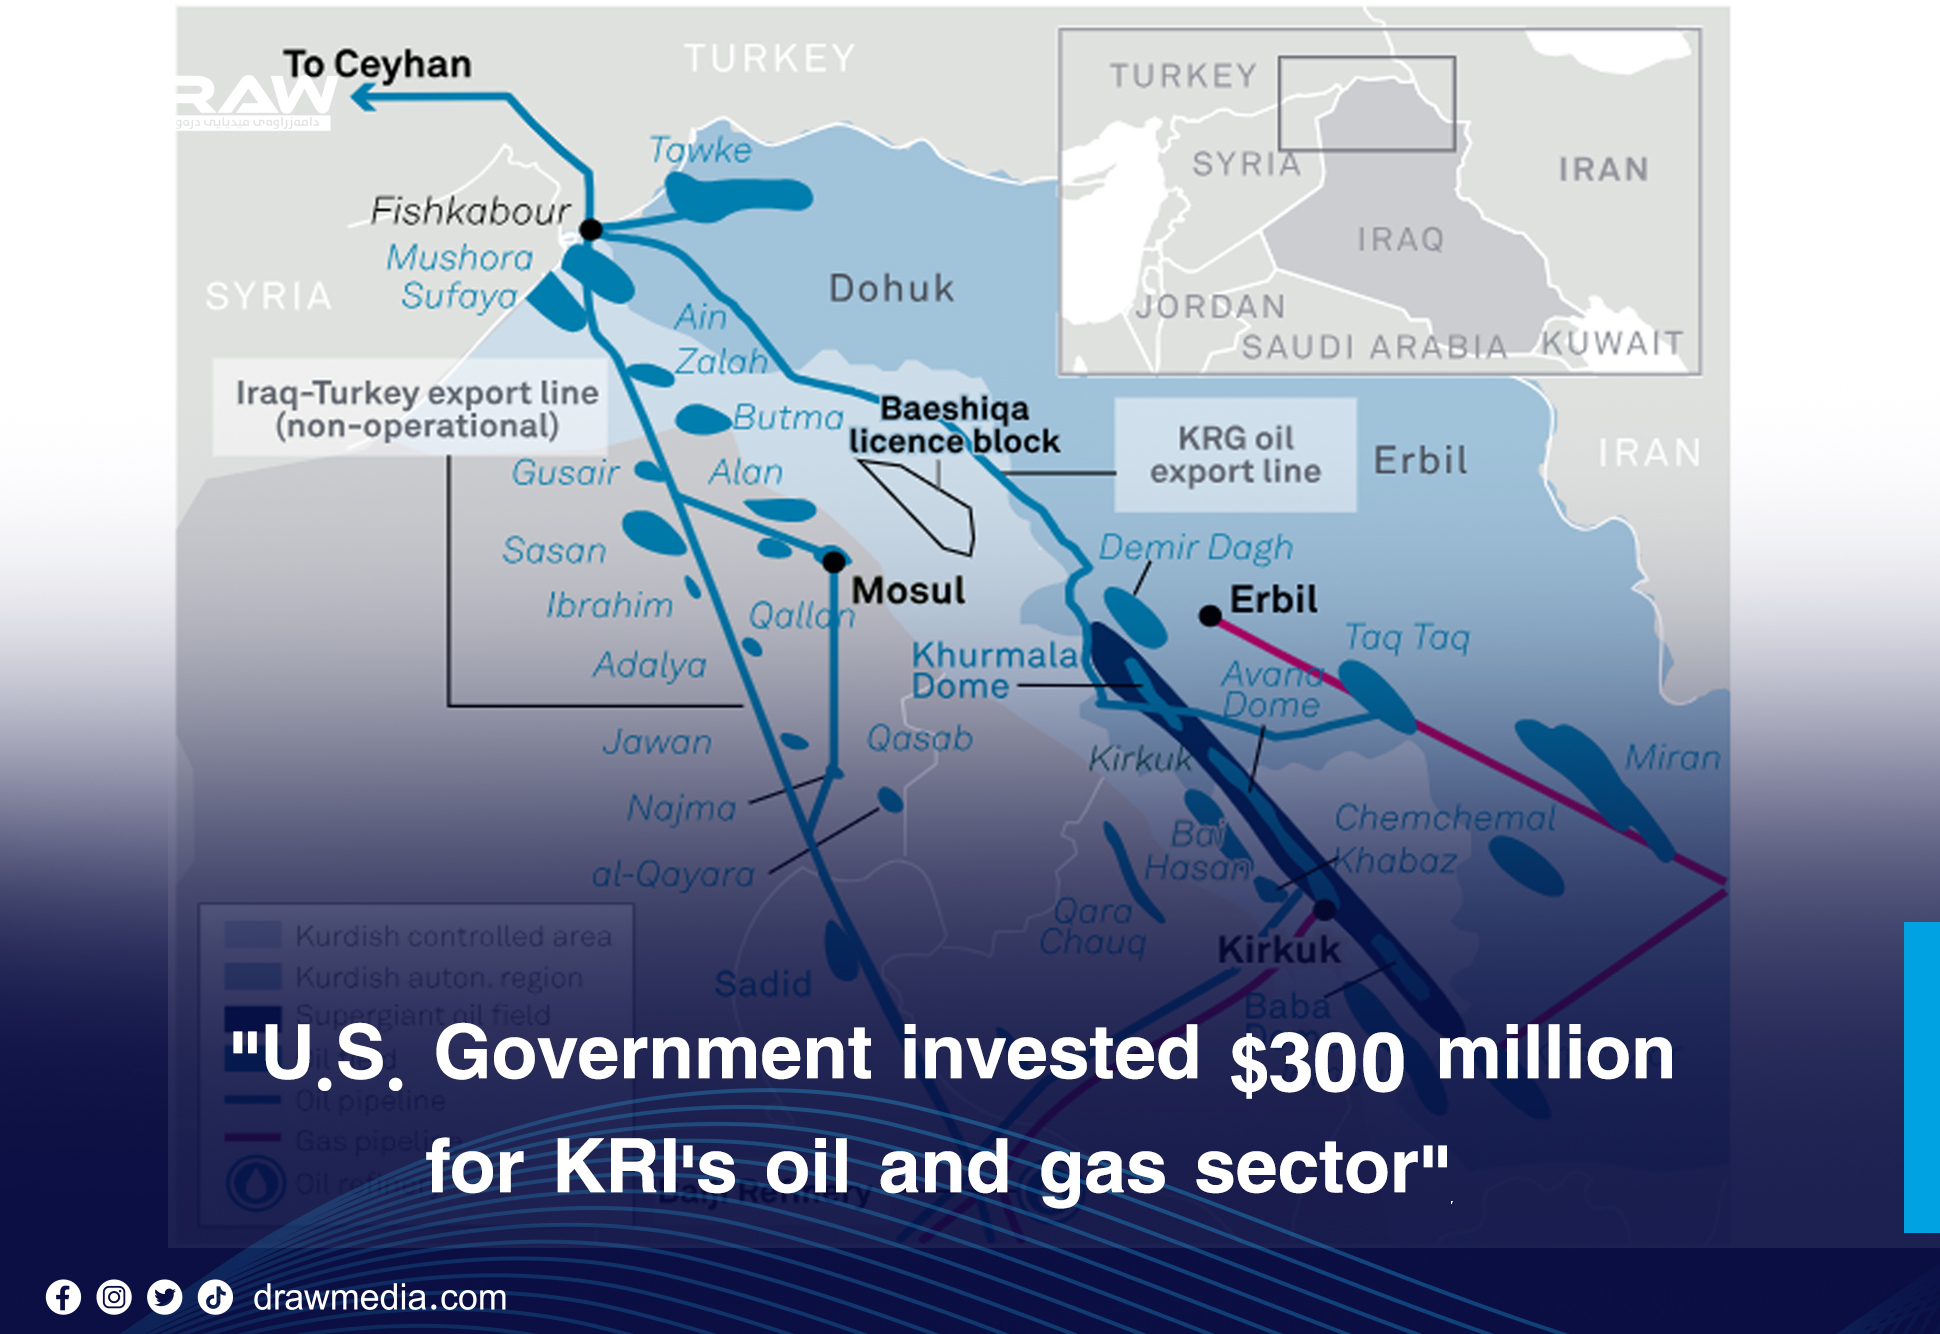 Draw Media- U.S. Government invested $300 million for KRI's oil and gas sector